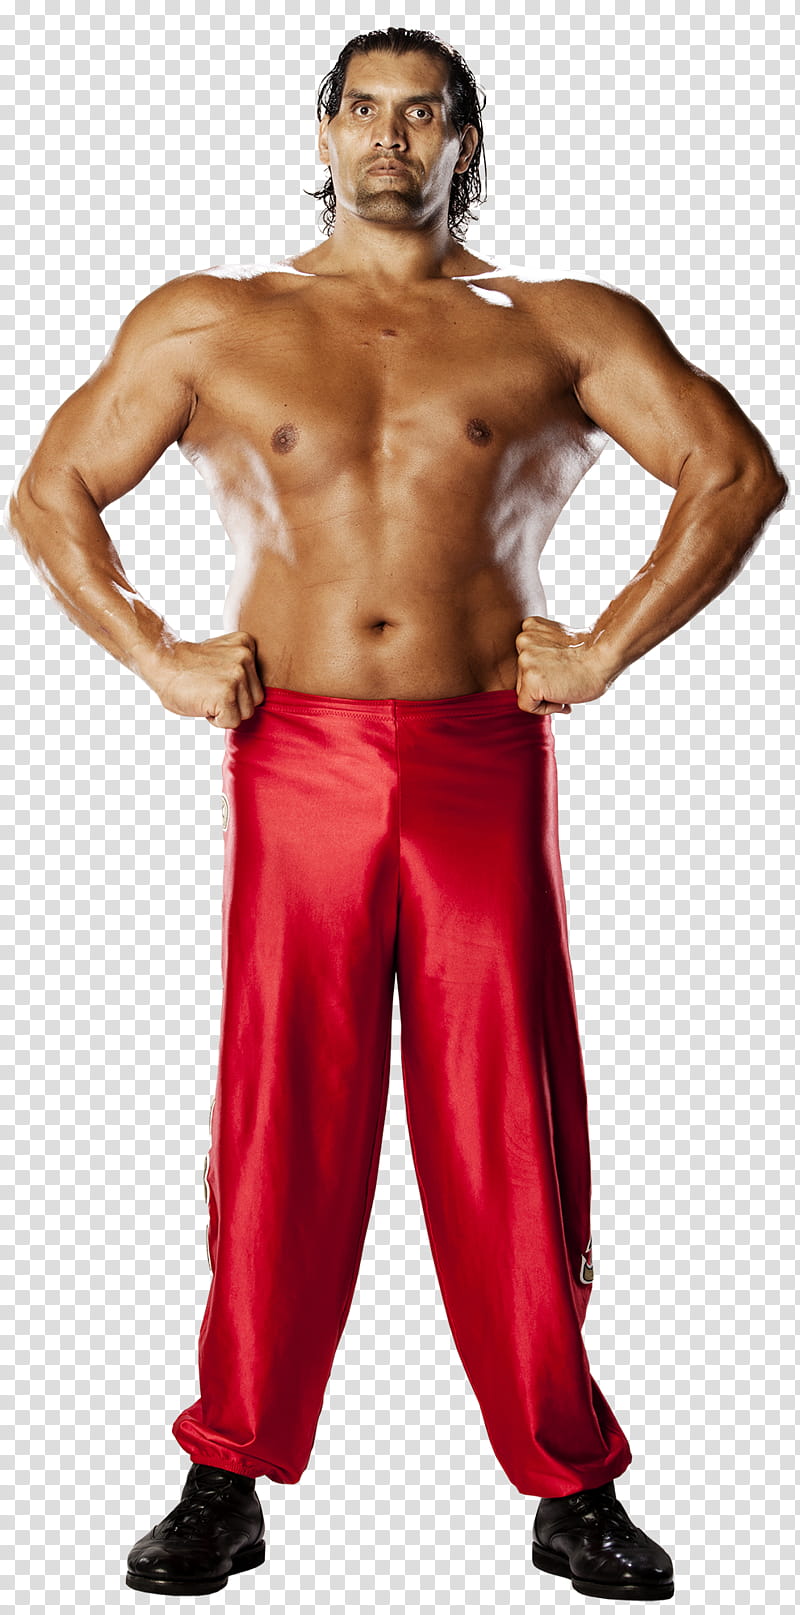 The Great Khali transparent background PNG clipart | HiClipart